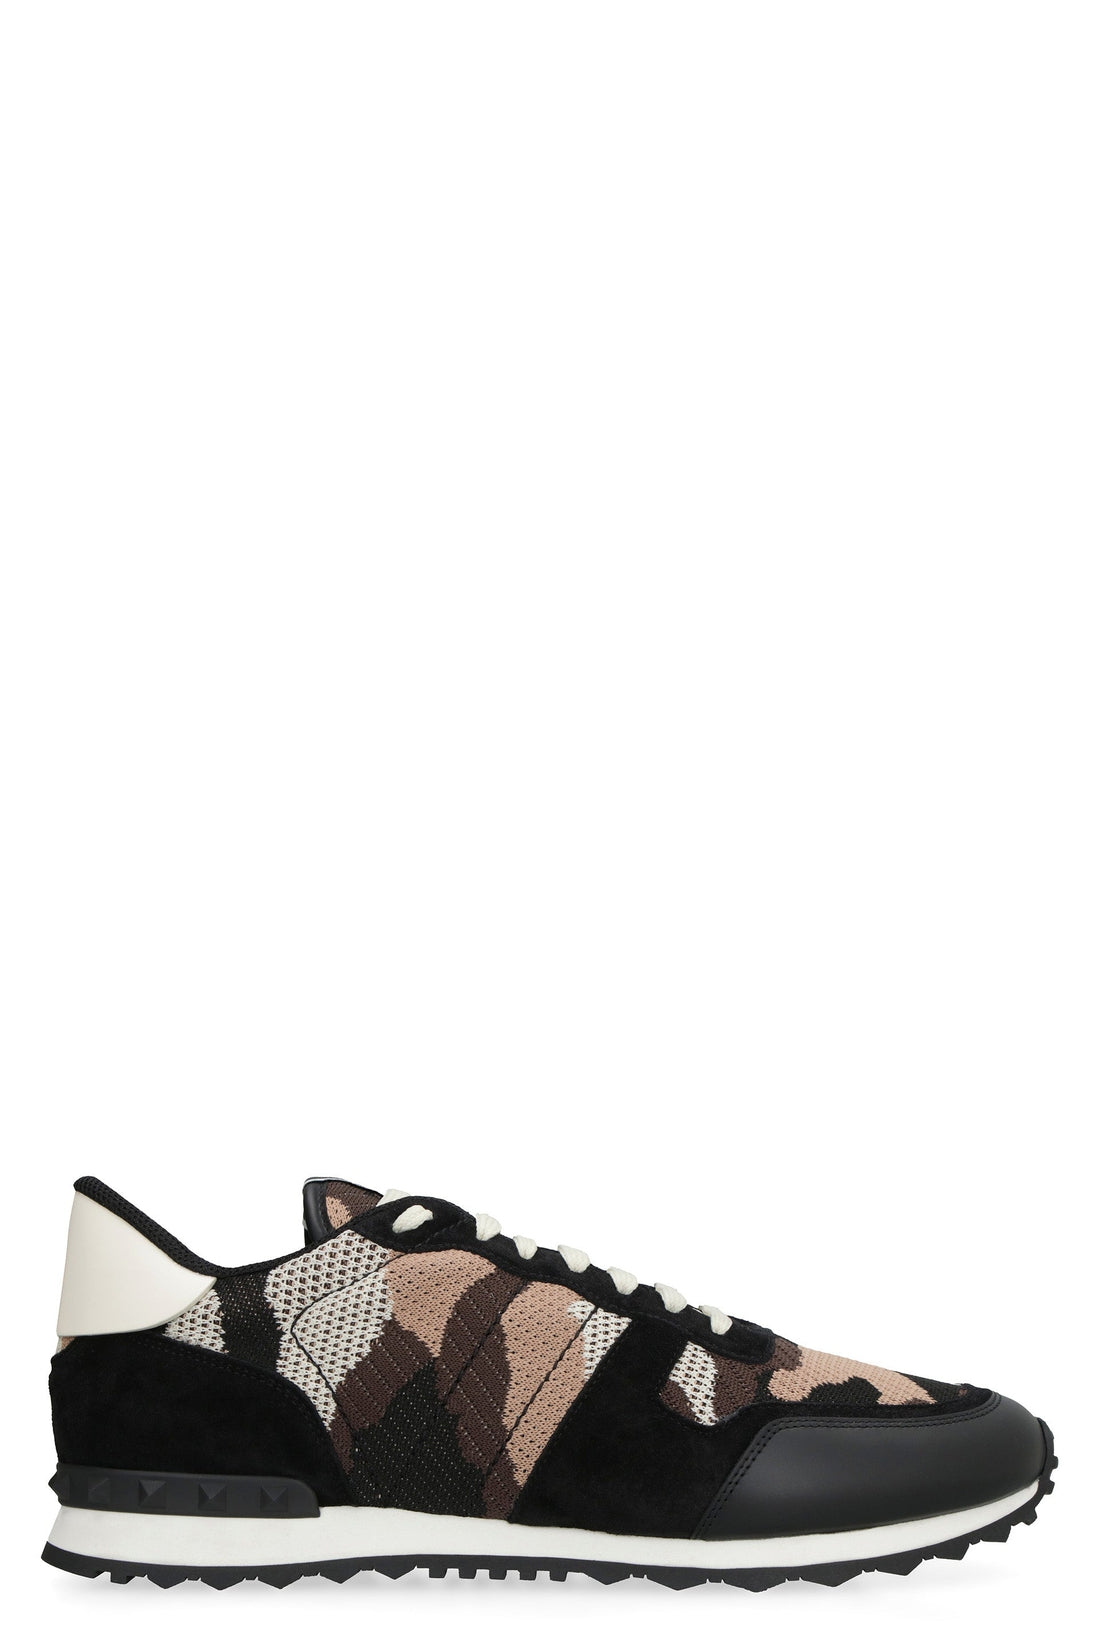 Valentino-OUTLET-SALE-Rockrunner fabric low-top sneakers-ARCHIVIST